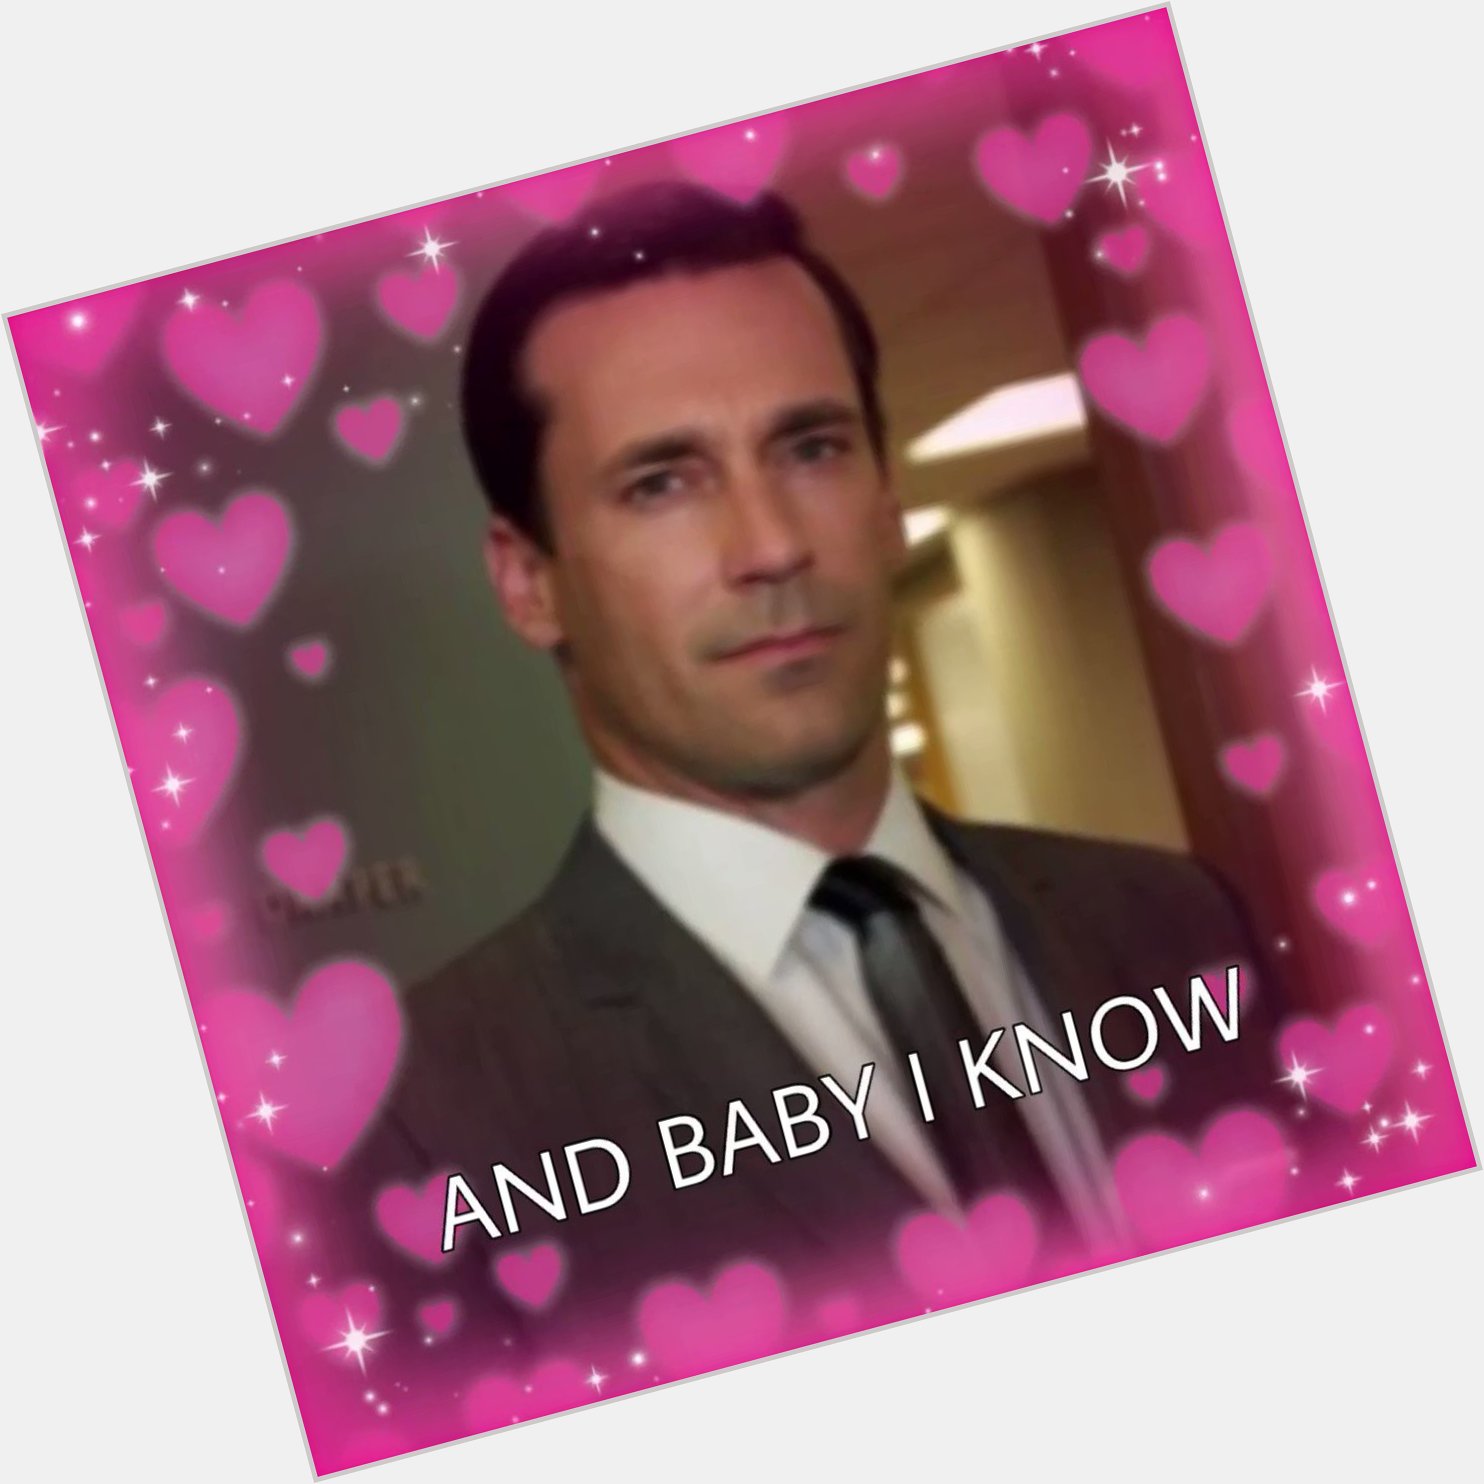 Happy birthday jon hamm you will never know what you\ve done for the babygirlification movement 